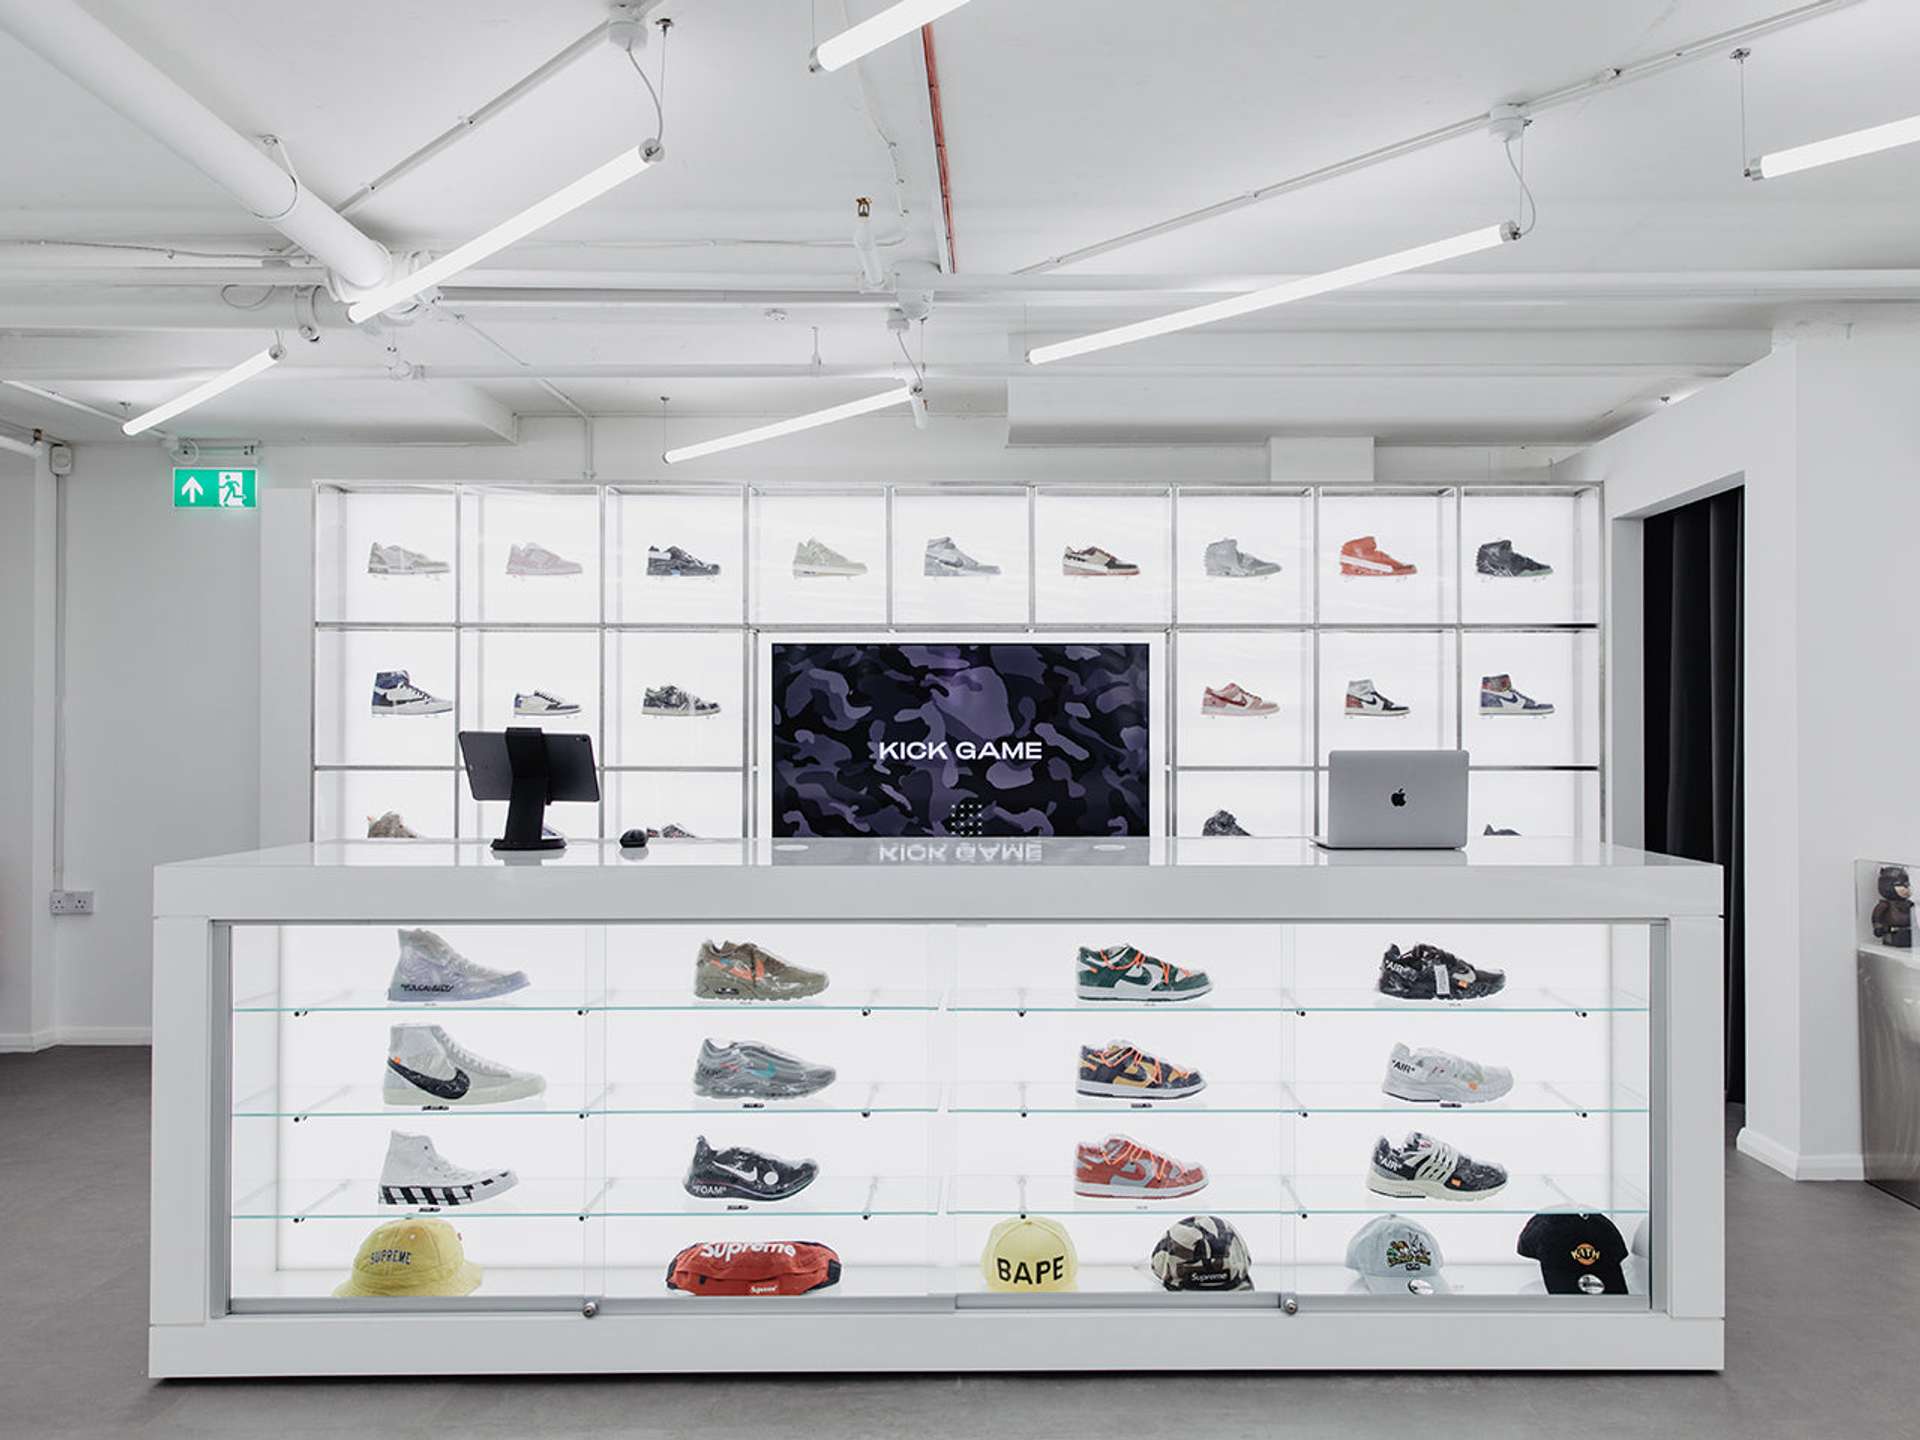 An image of one of KickGame’s sneaker stores, showing all shoes against a white background.